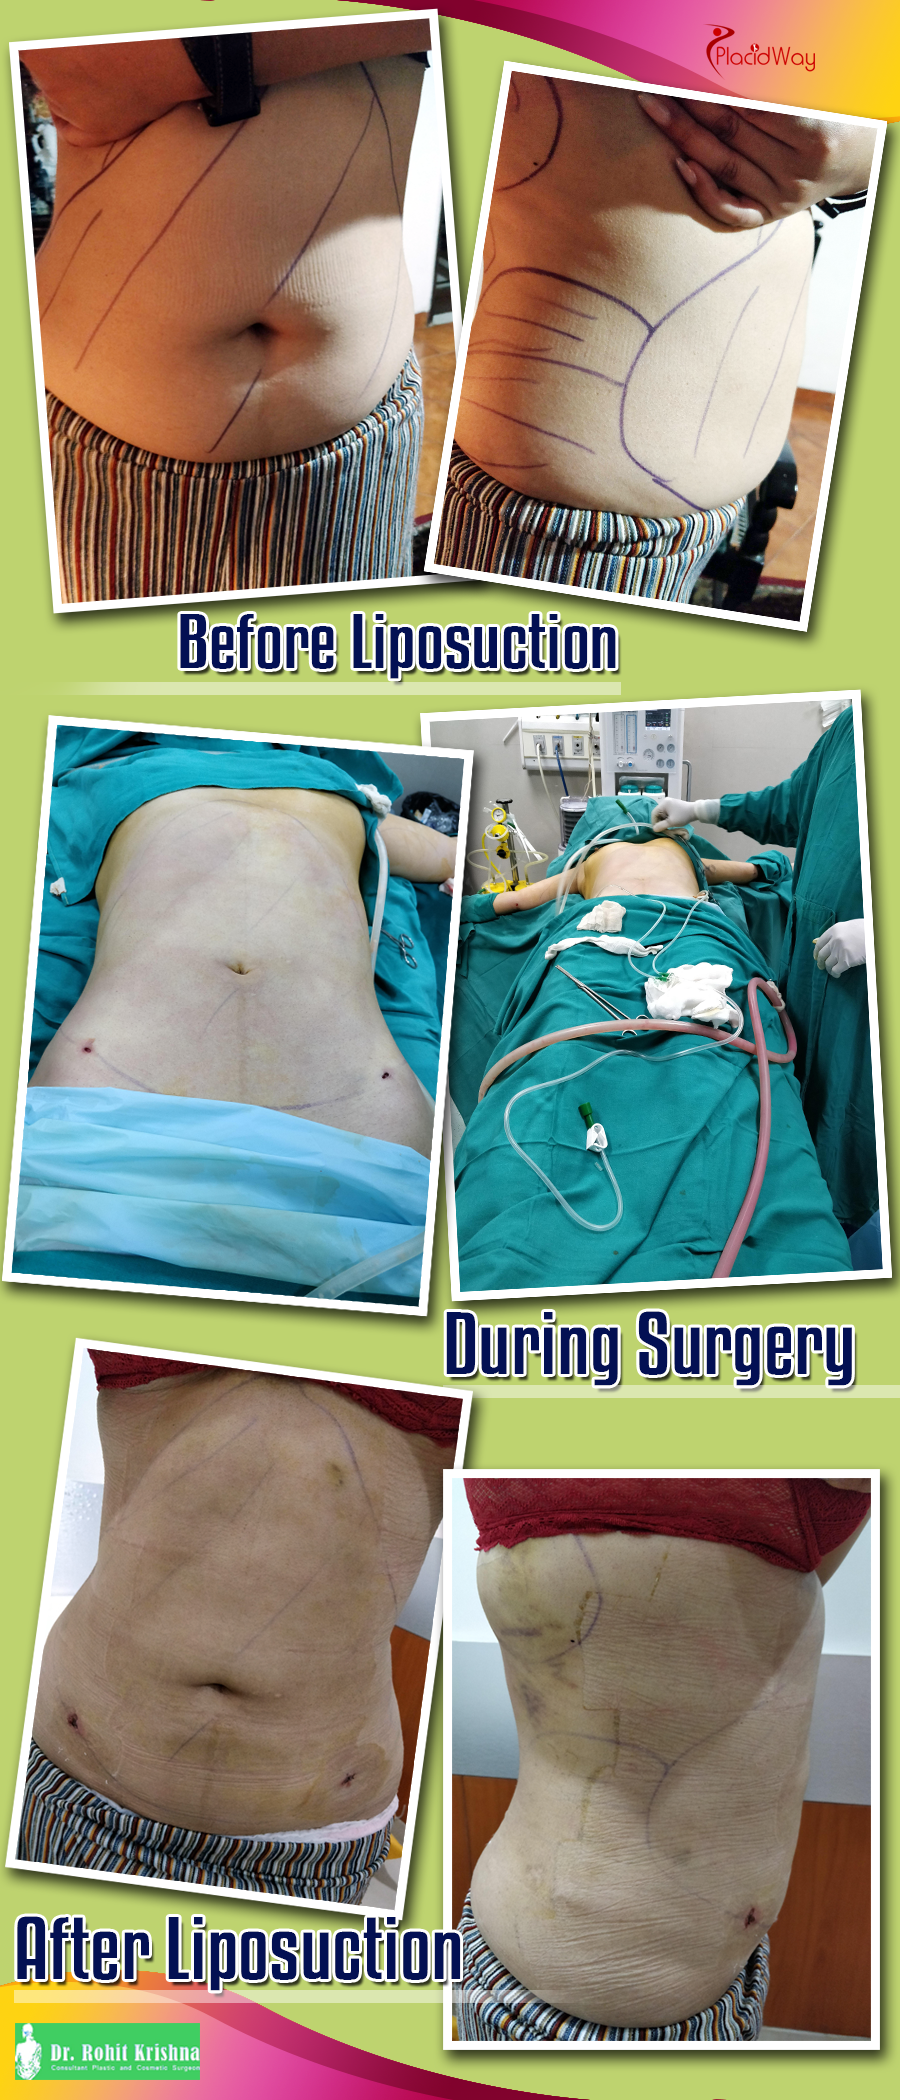 Patient Testimonial after Liposuction Surgery in India